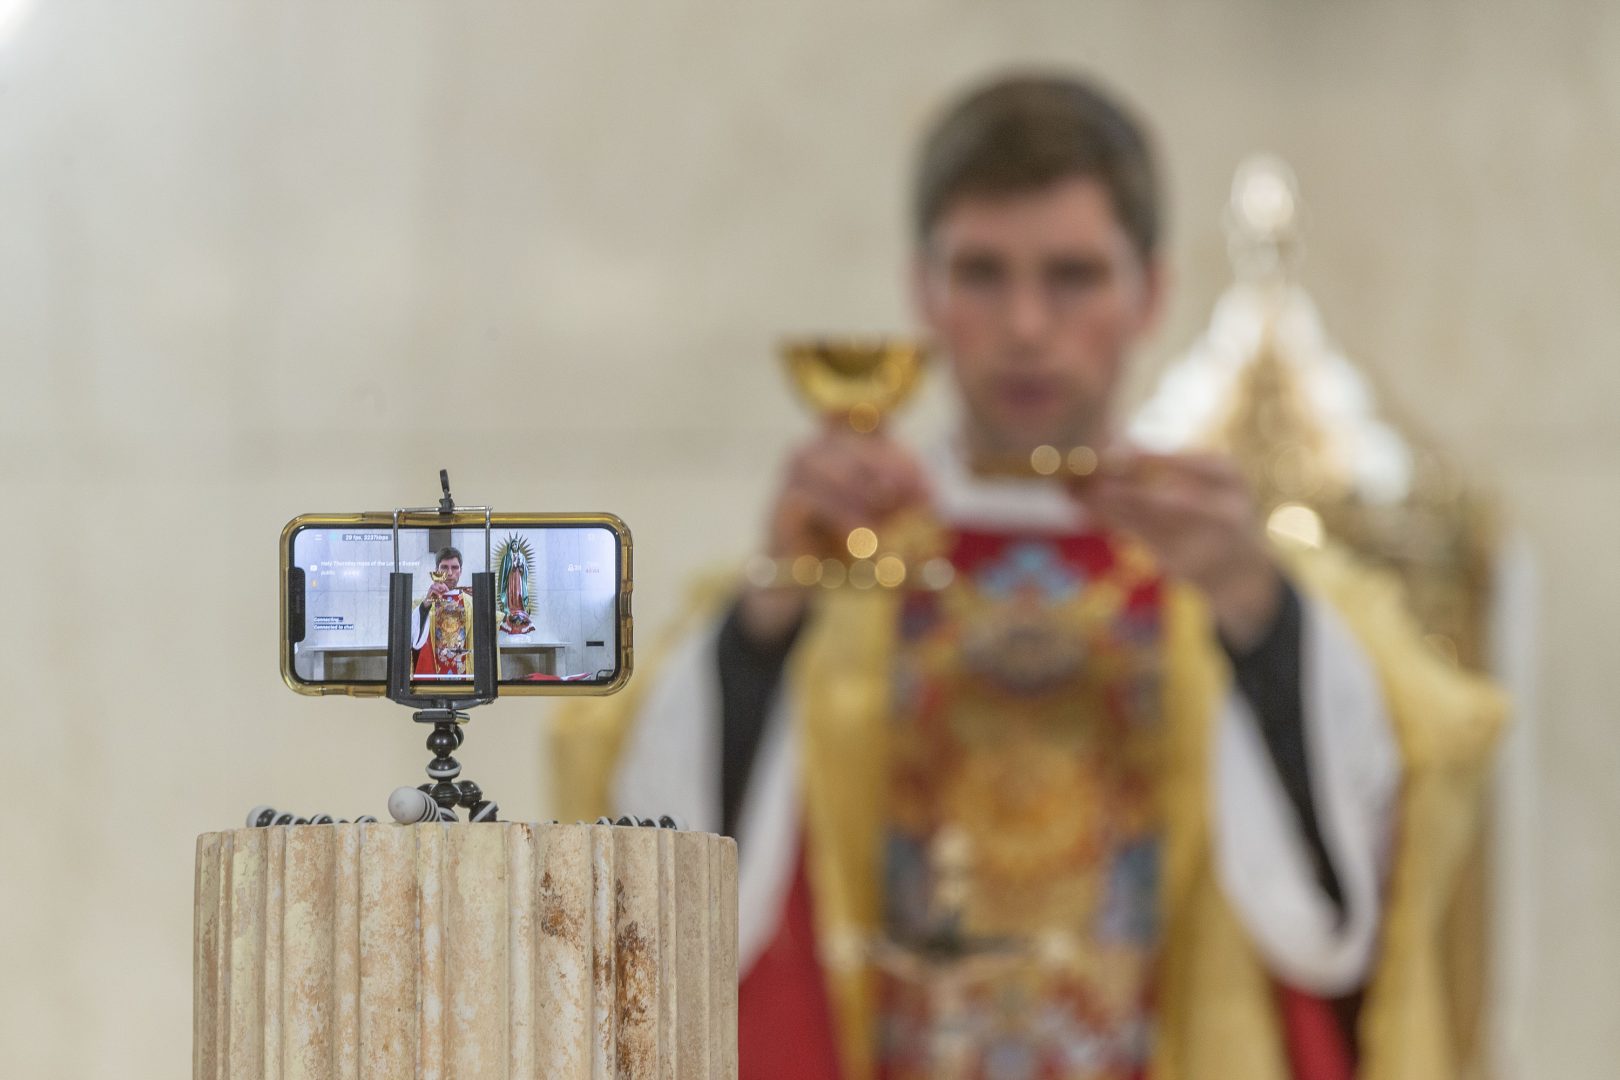 The Rev. Matthew Wheeler is seen on an iPhone screen live-streaming the celebration of the the Mass of the Lord's Supper at St. Anthony Parish in San Gabriel, Calif., Thursday, April 9, 2020. With no public Mass due to the coronavirus pandemic, the church live-streams its services.